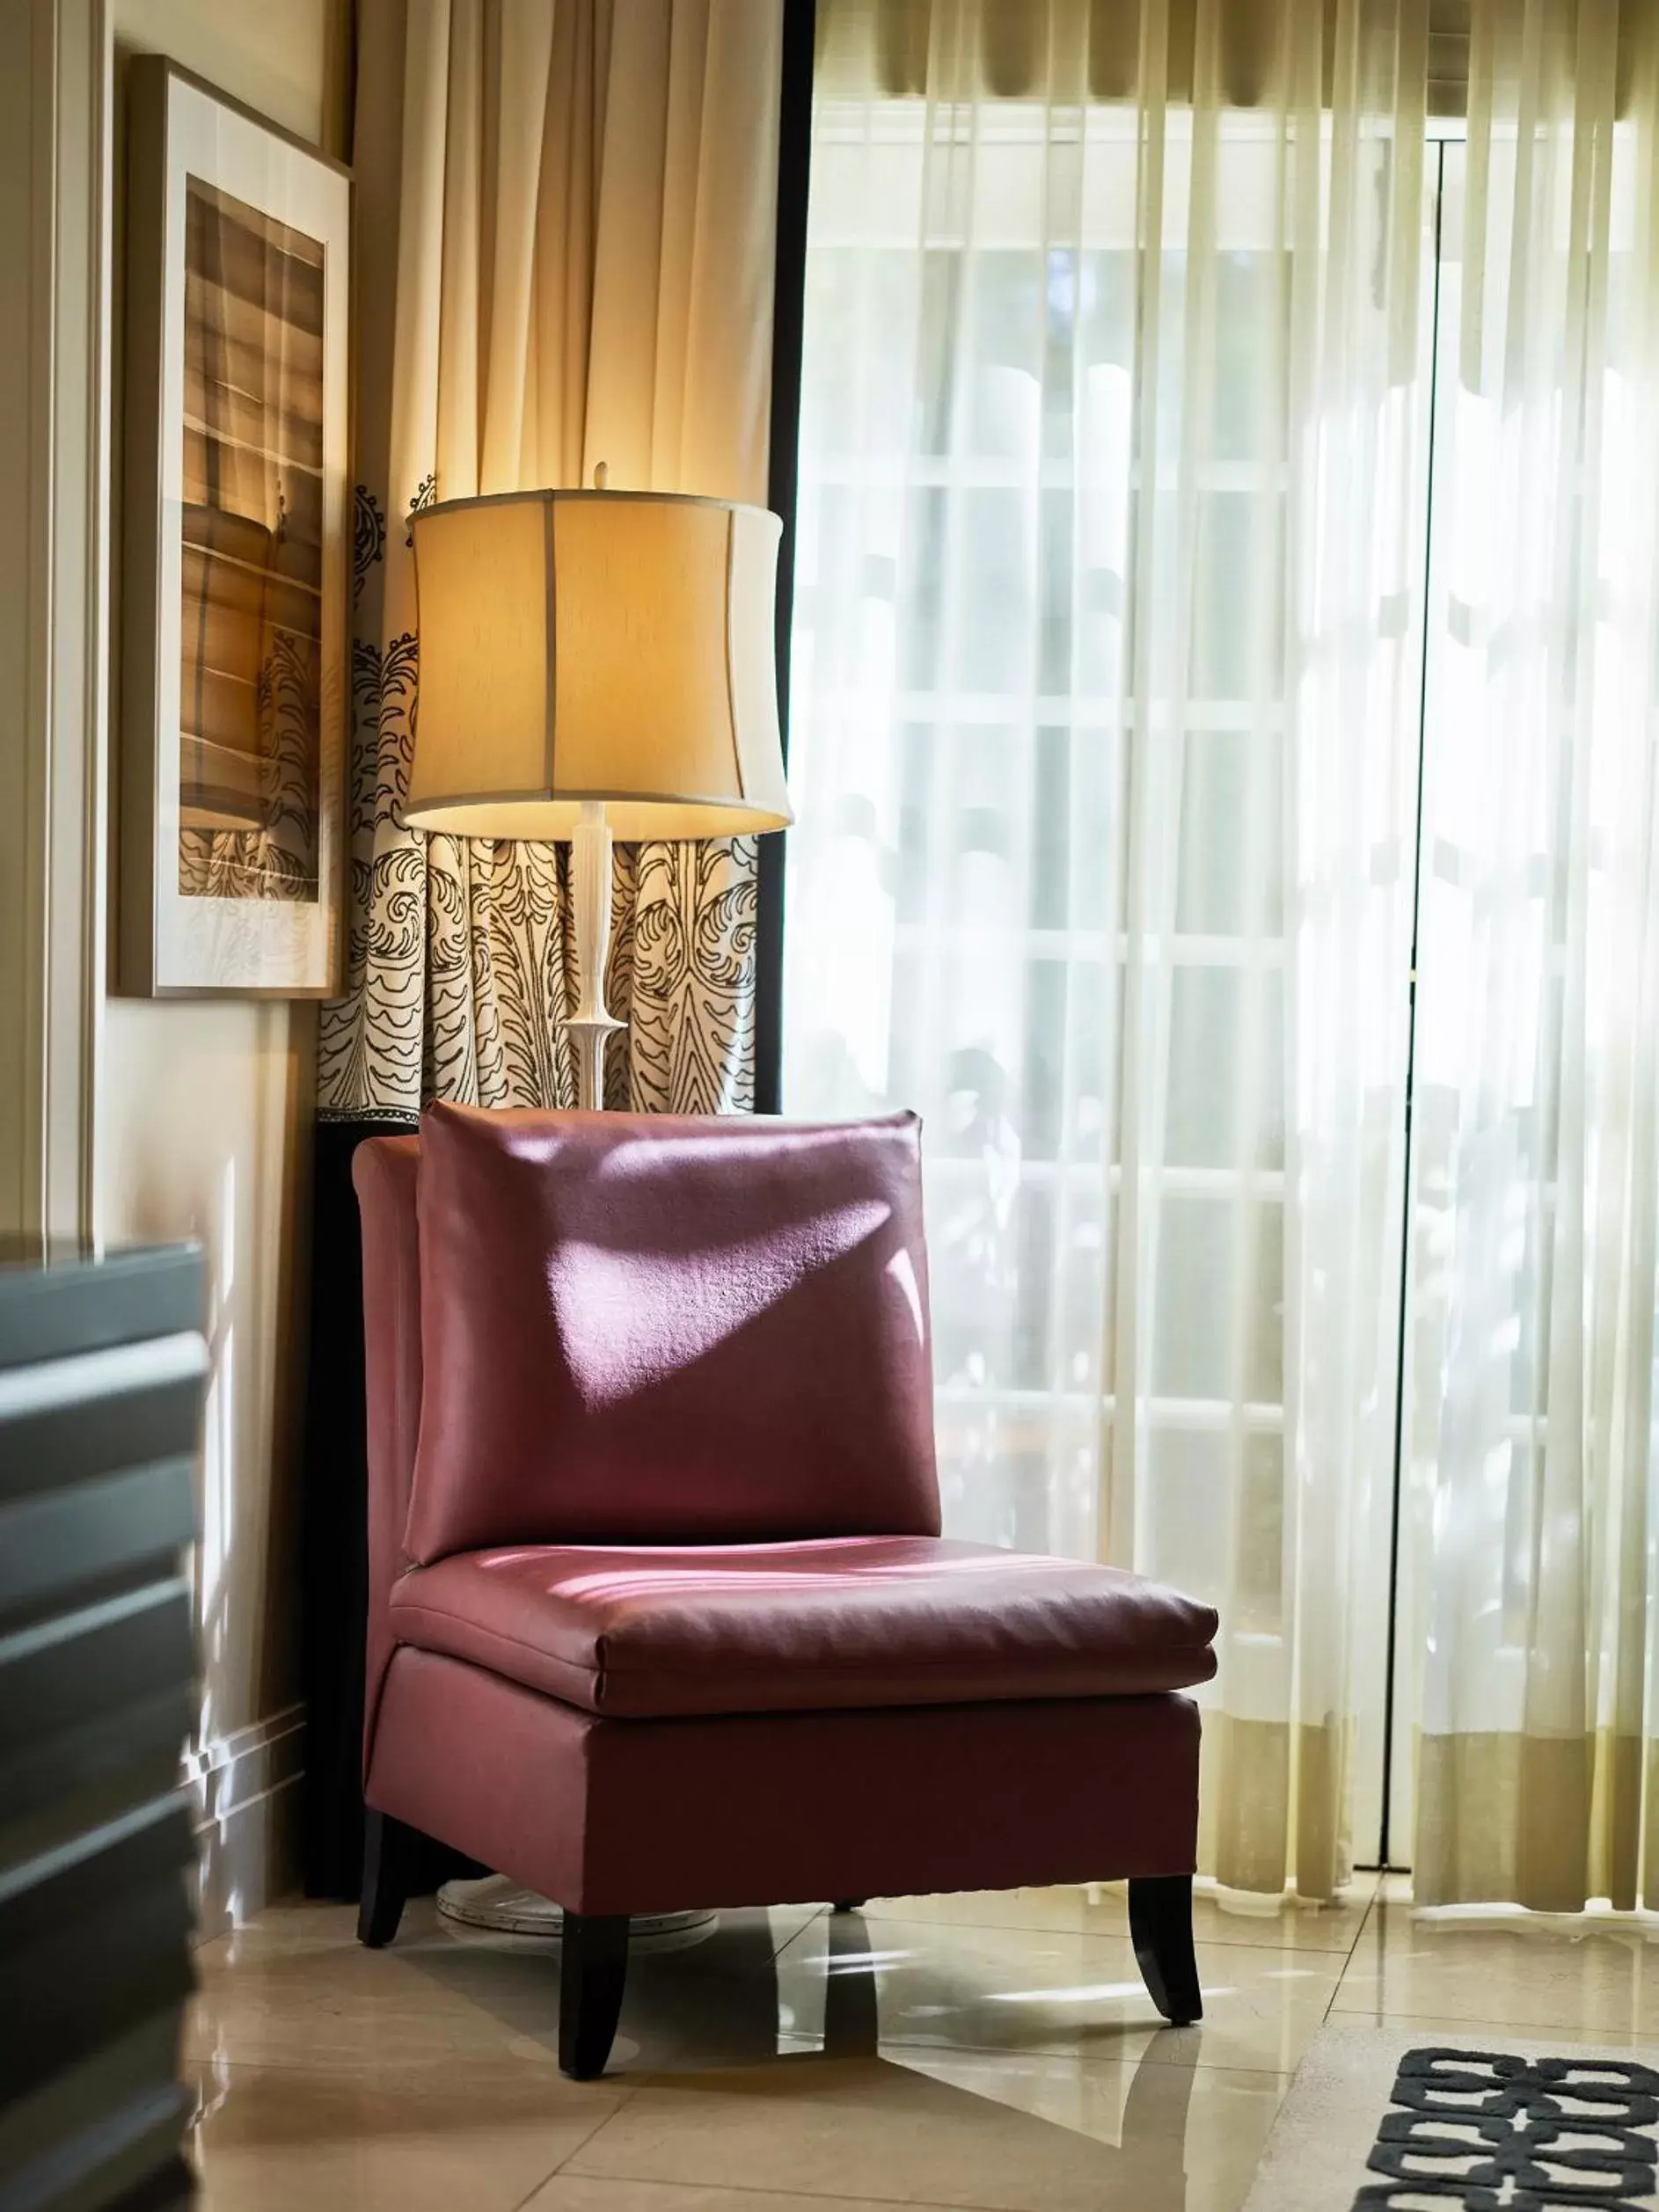 Decorative detail, Seating Area in Hotel Bel-Air - Dorchester Collection